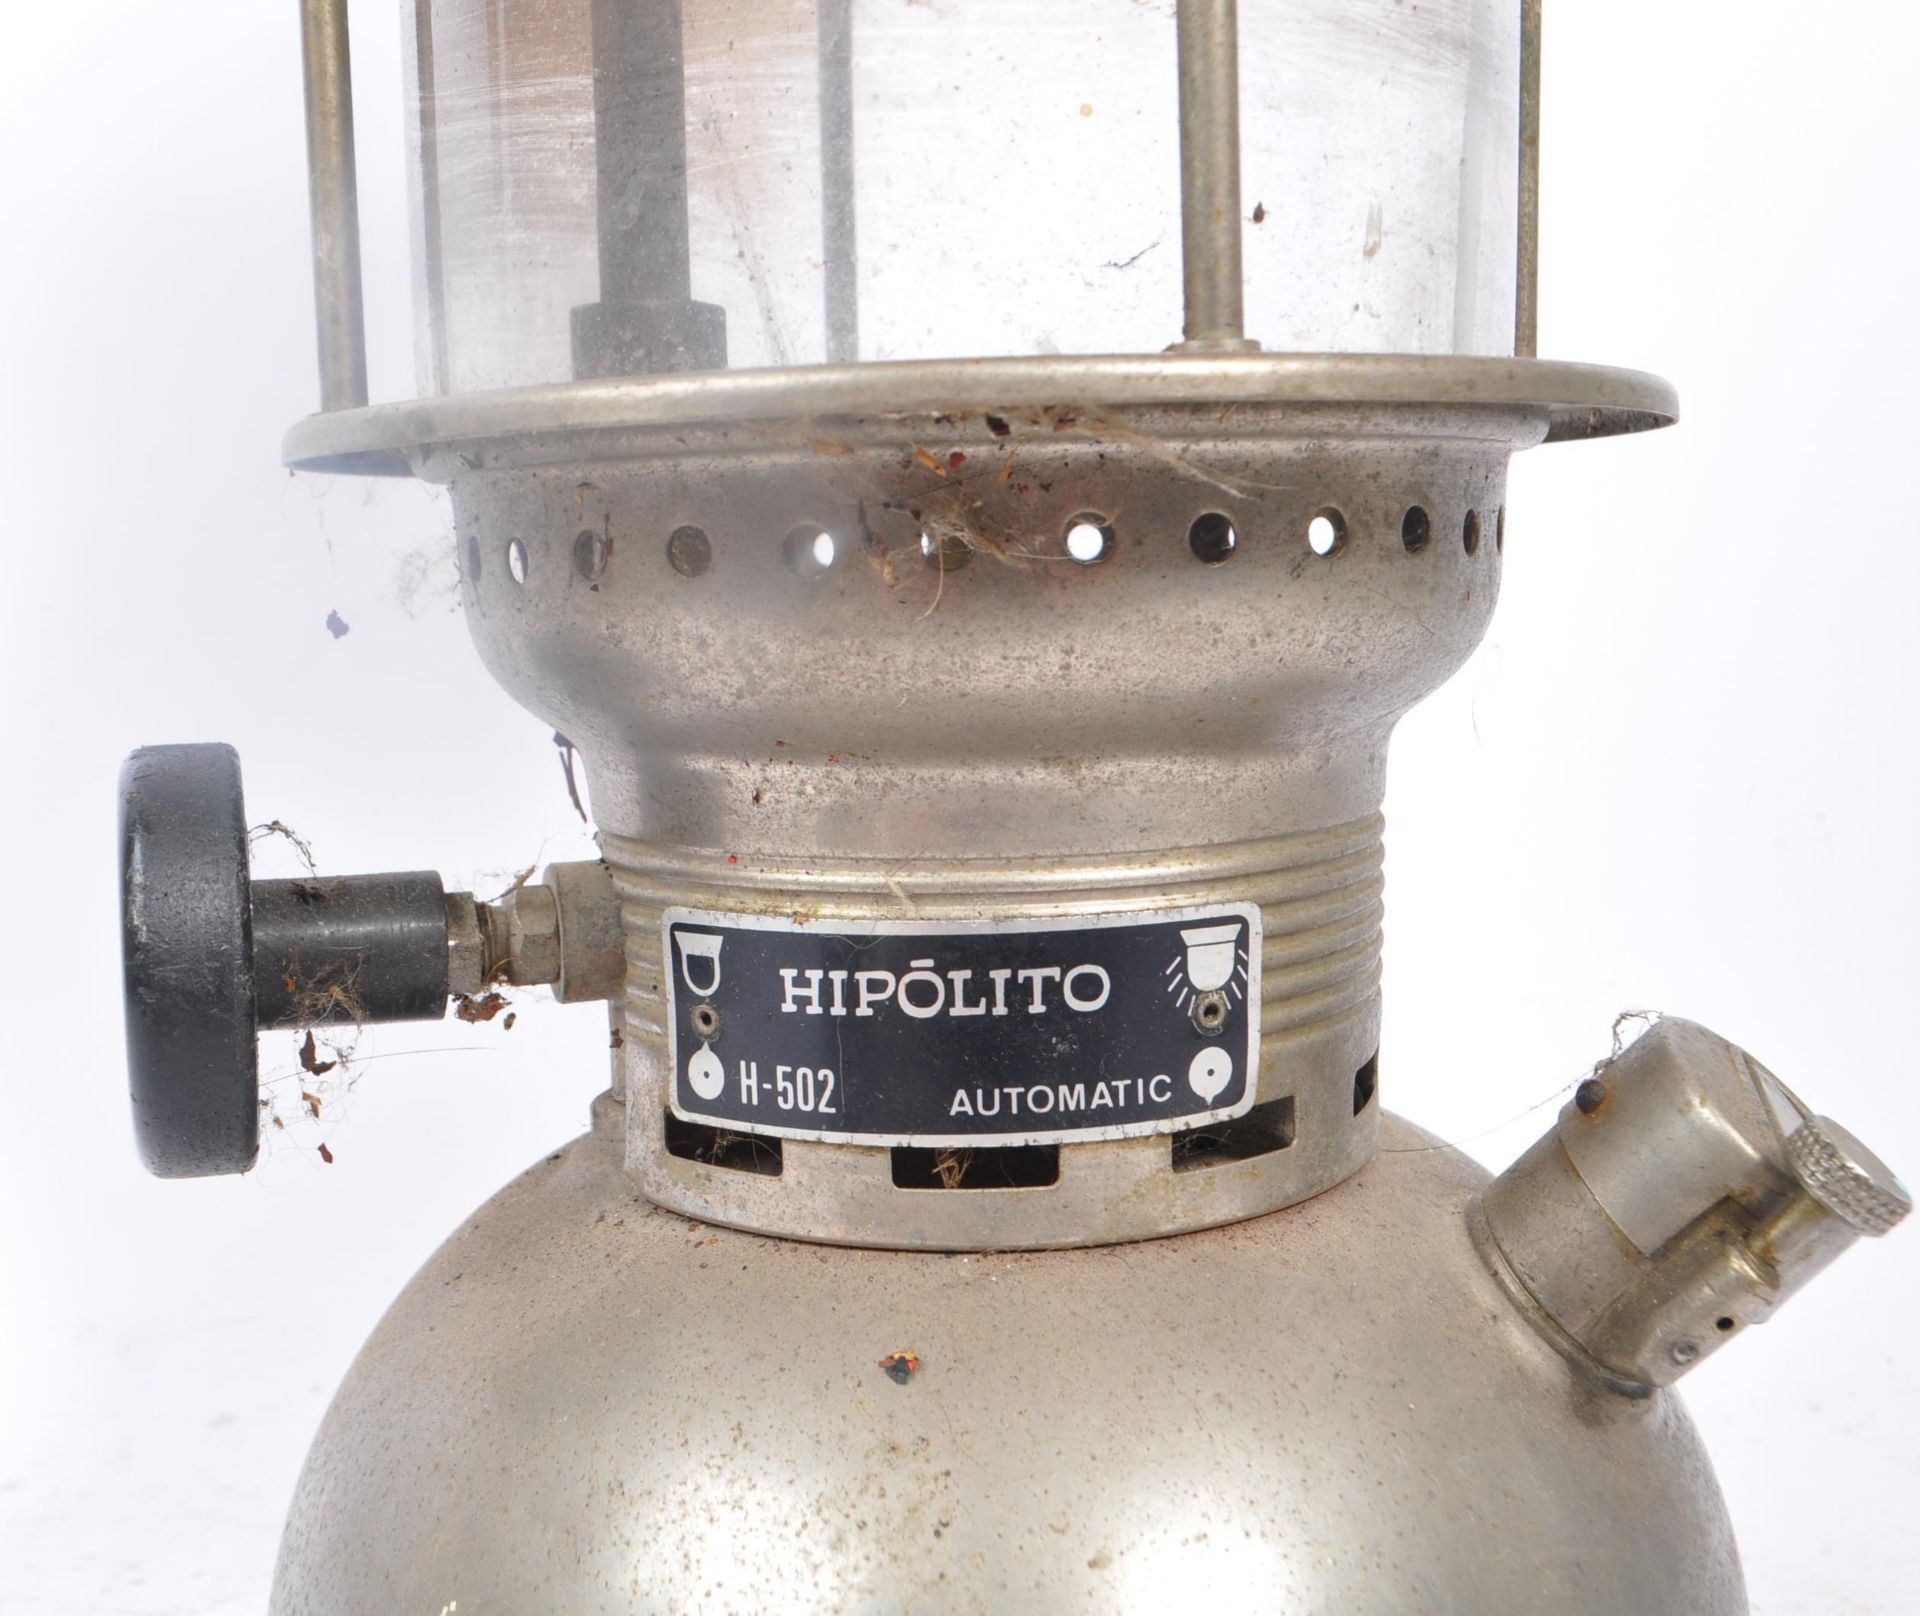 HIPOLITO - 20TH CENTURY H-502 AUTOMATIC PARAFFIN LAMP - Image 2 of 8